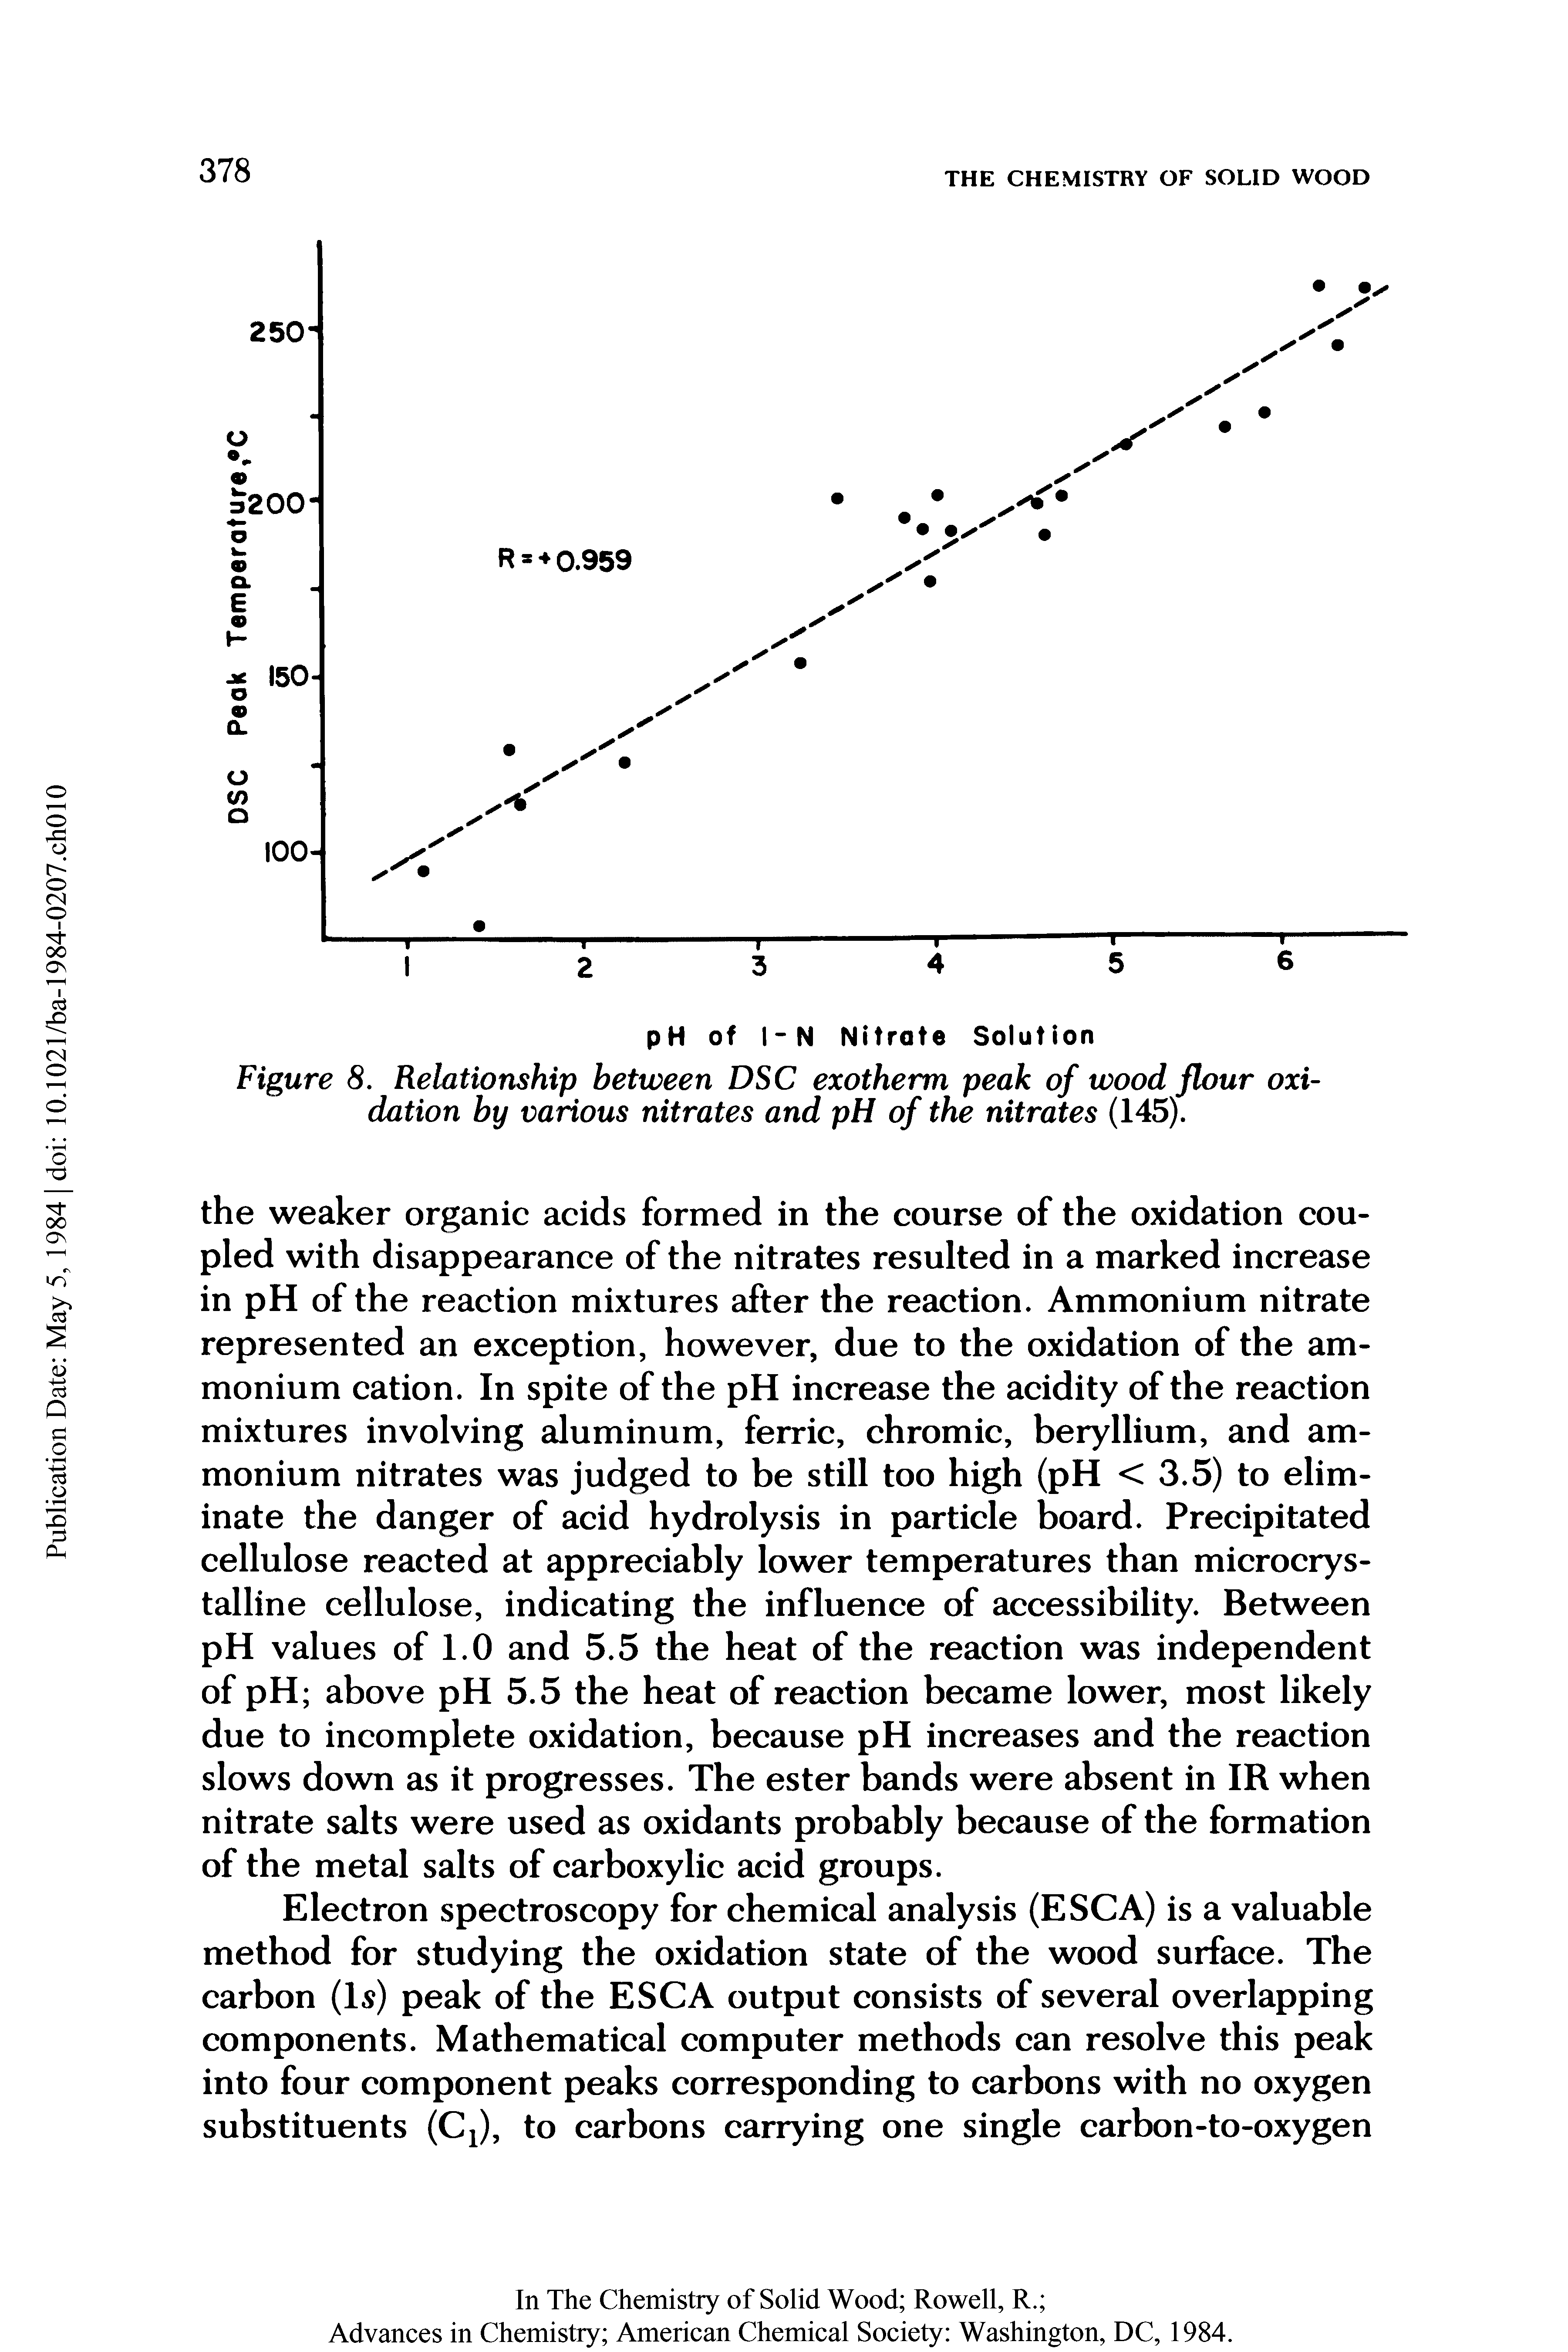 Figure 8. Relationship between DSC exotherm peak of wood flour oxidation by various nitrates and pH of the nitrates (145).